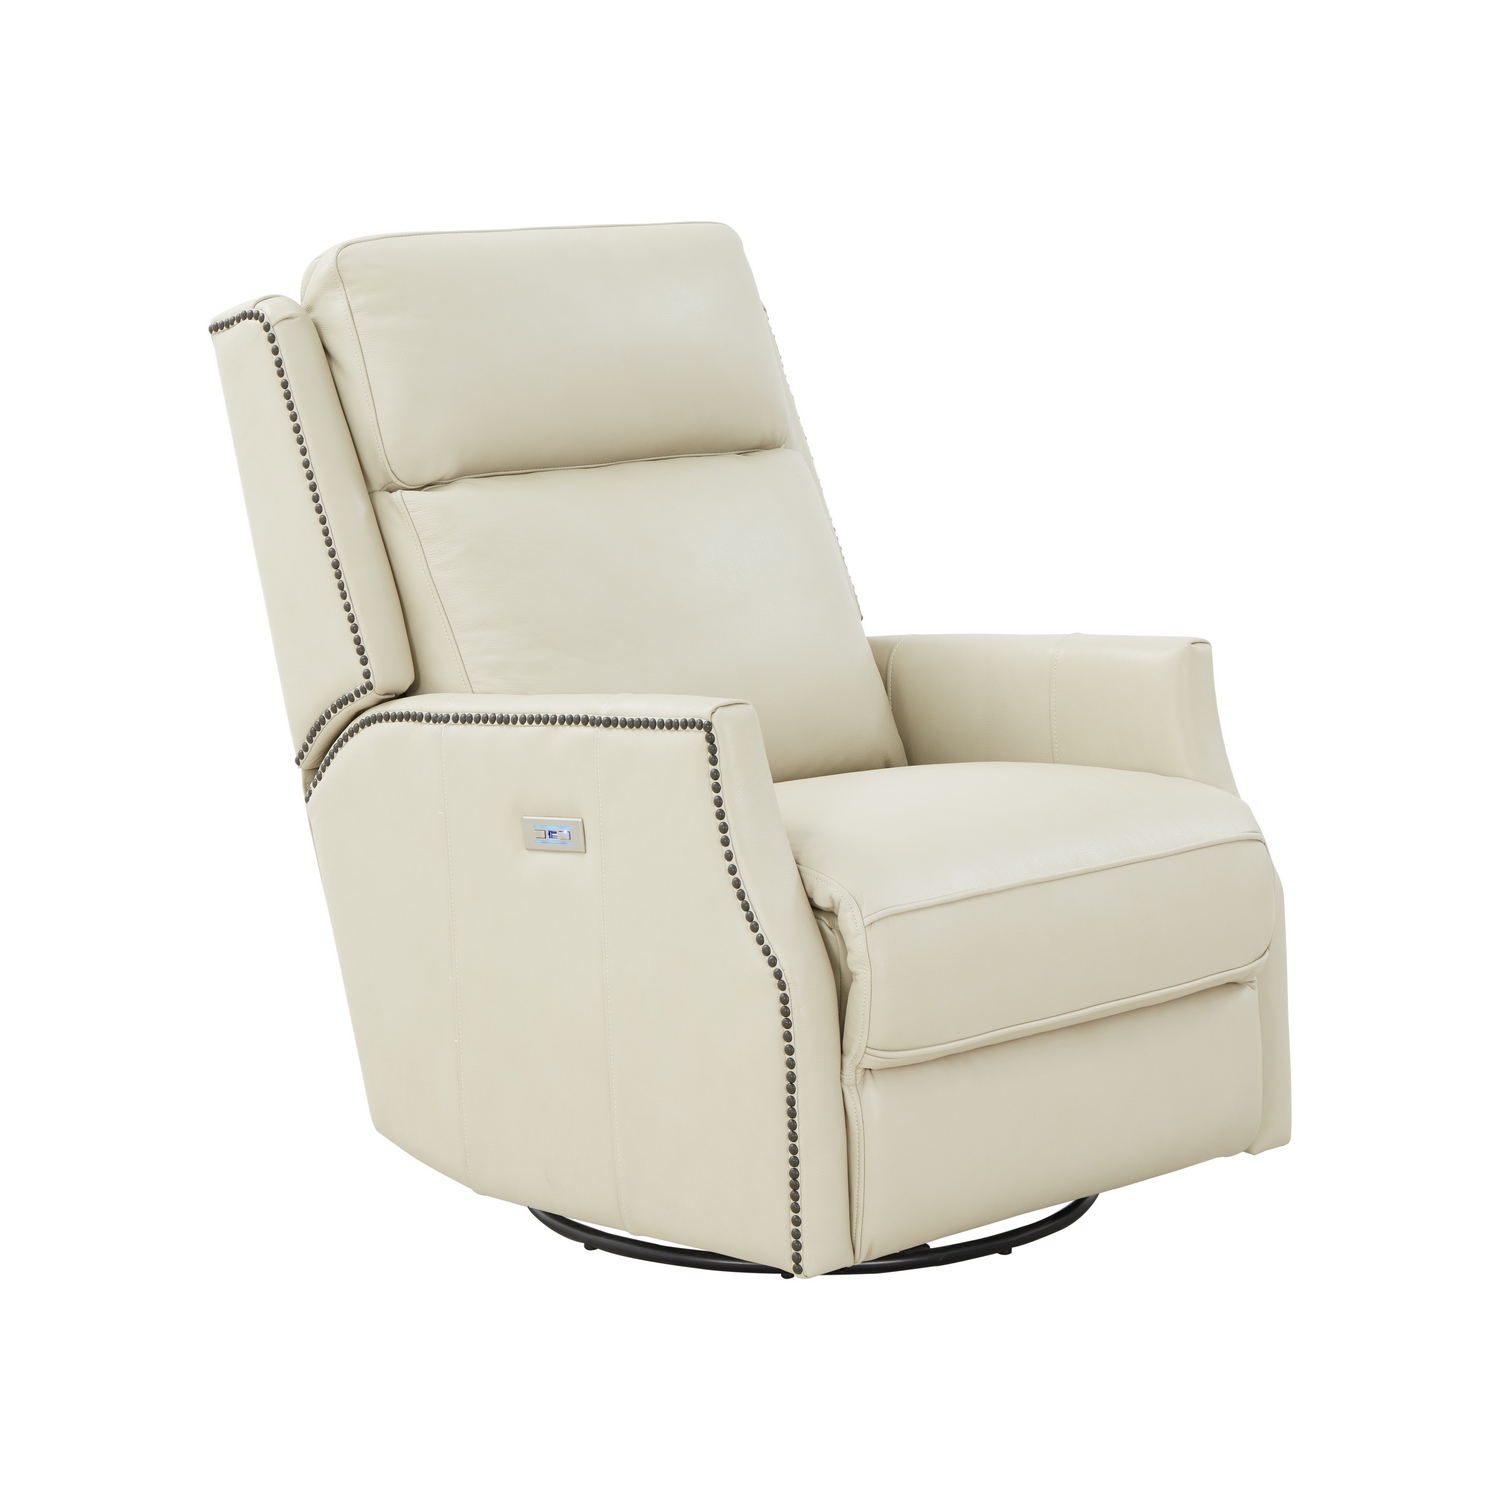 Barcalounger Cavill Swivel Glider Recliner Chair with Power Recline and Power Head Rest - Barone Parchment/All Leather